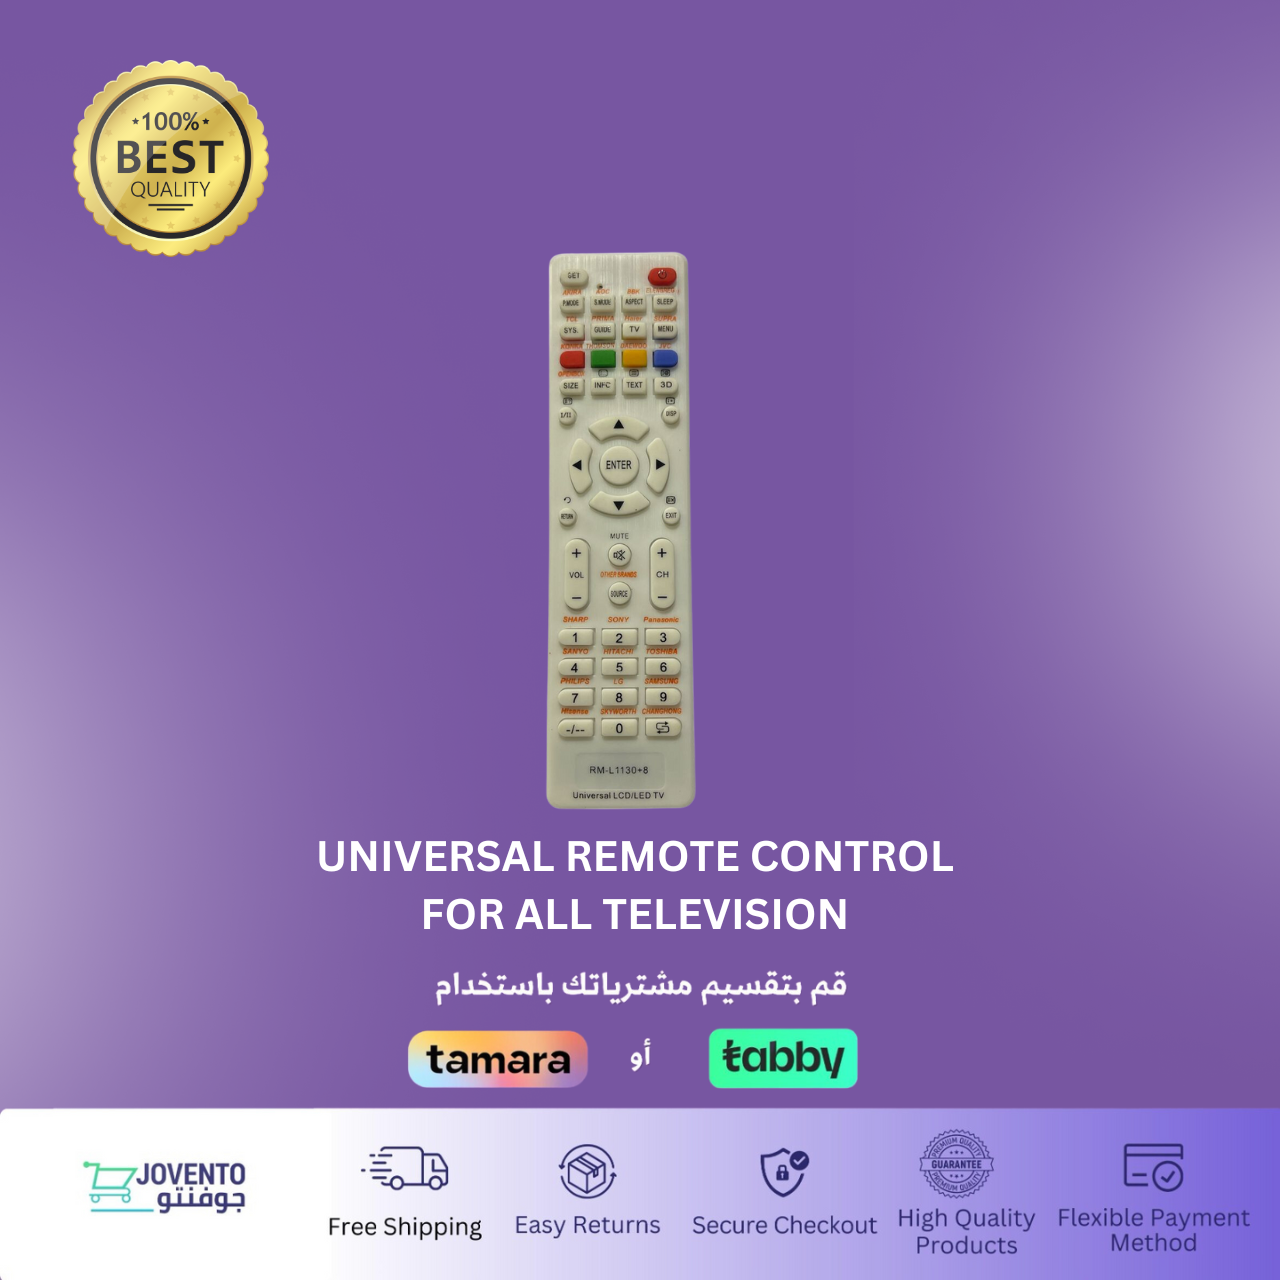 UNIVERSAL REMOTE CONTROL FOR ALL TELEVISION